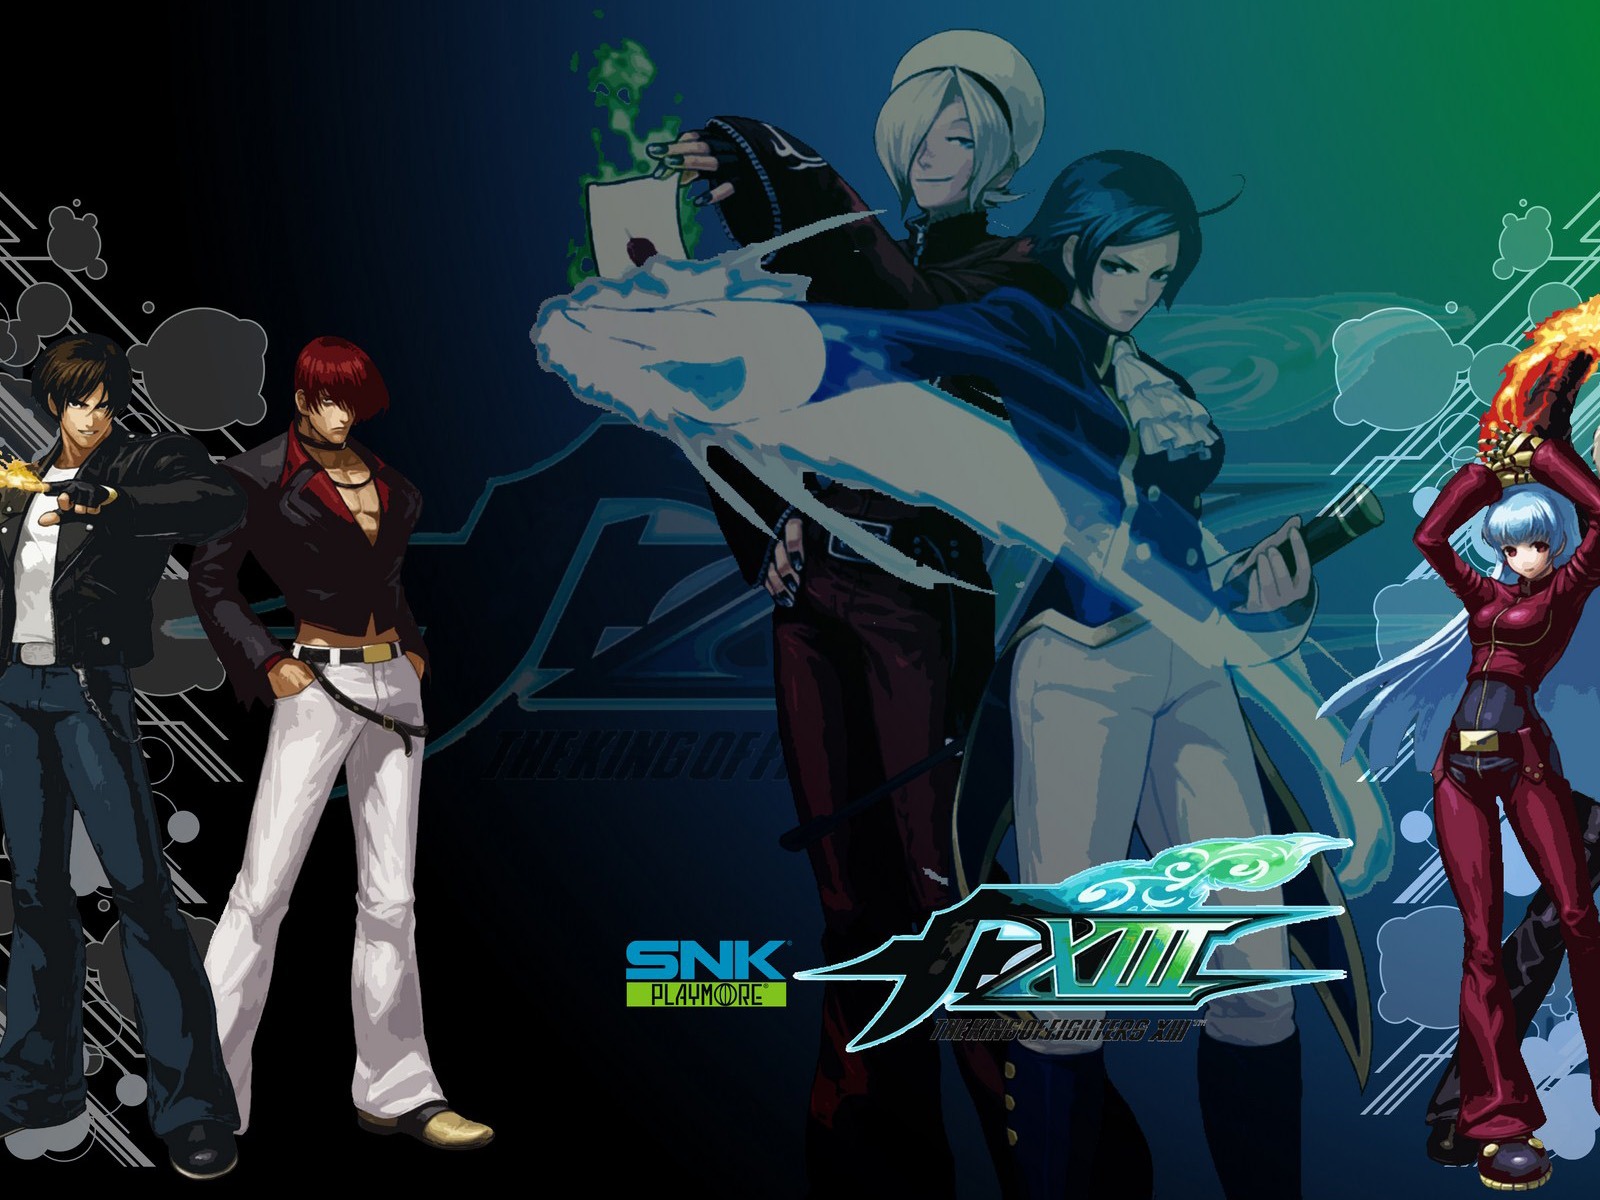 The King of Fighters XIII 拳皇13 壁纸专辑4 - 1600x1200